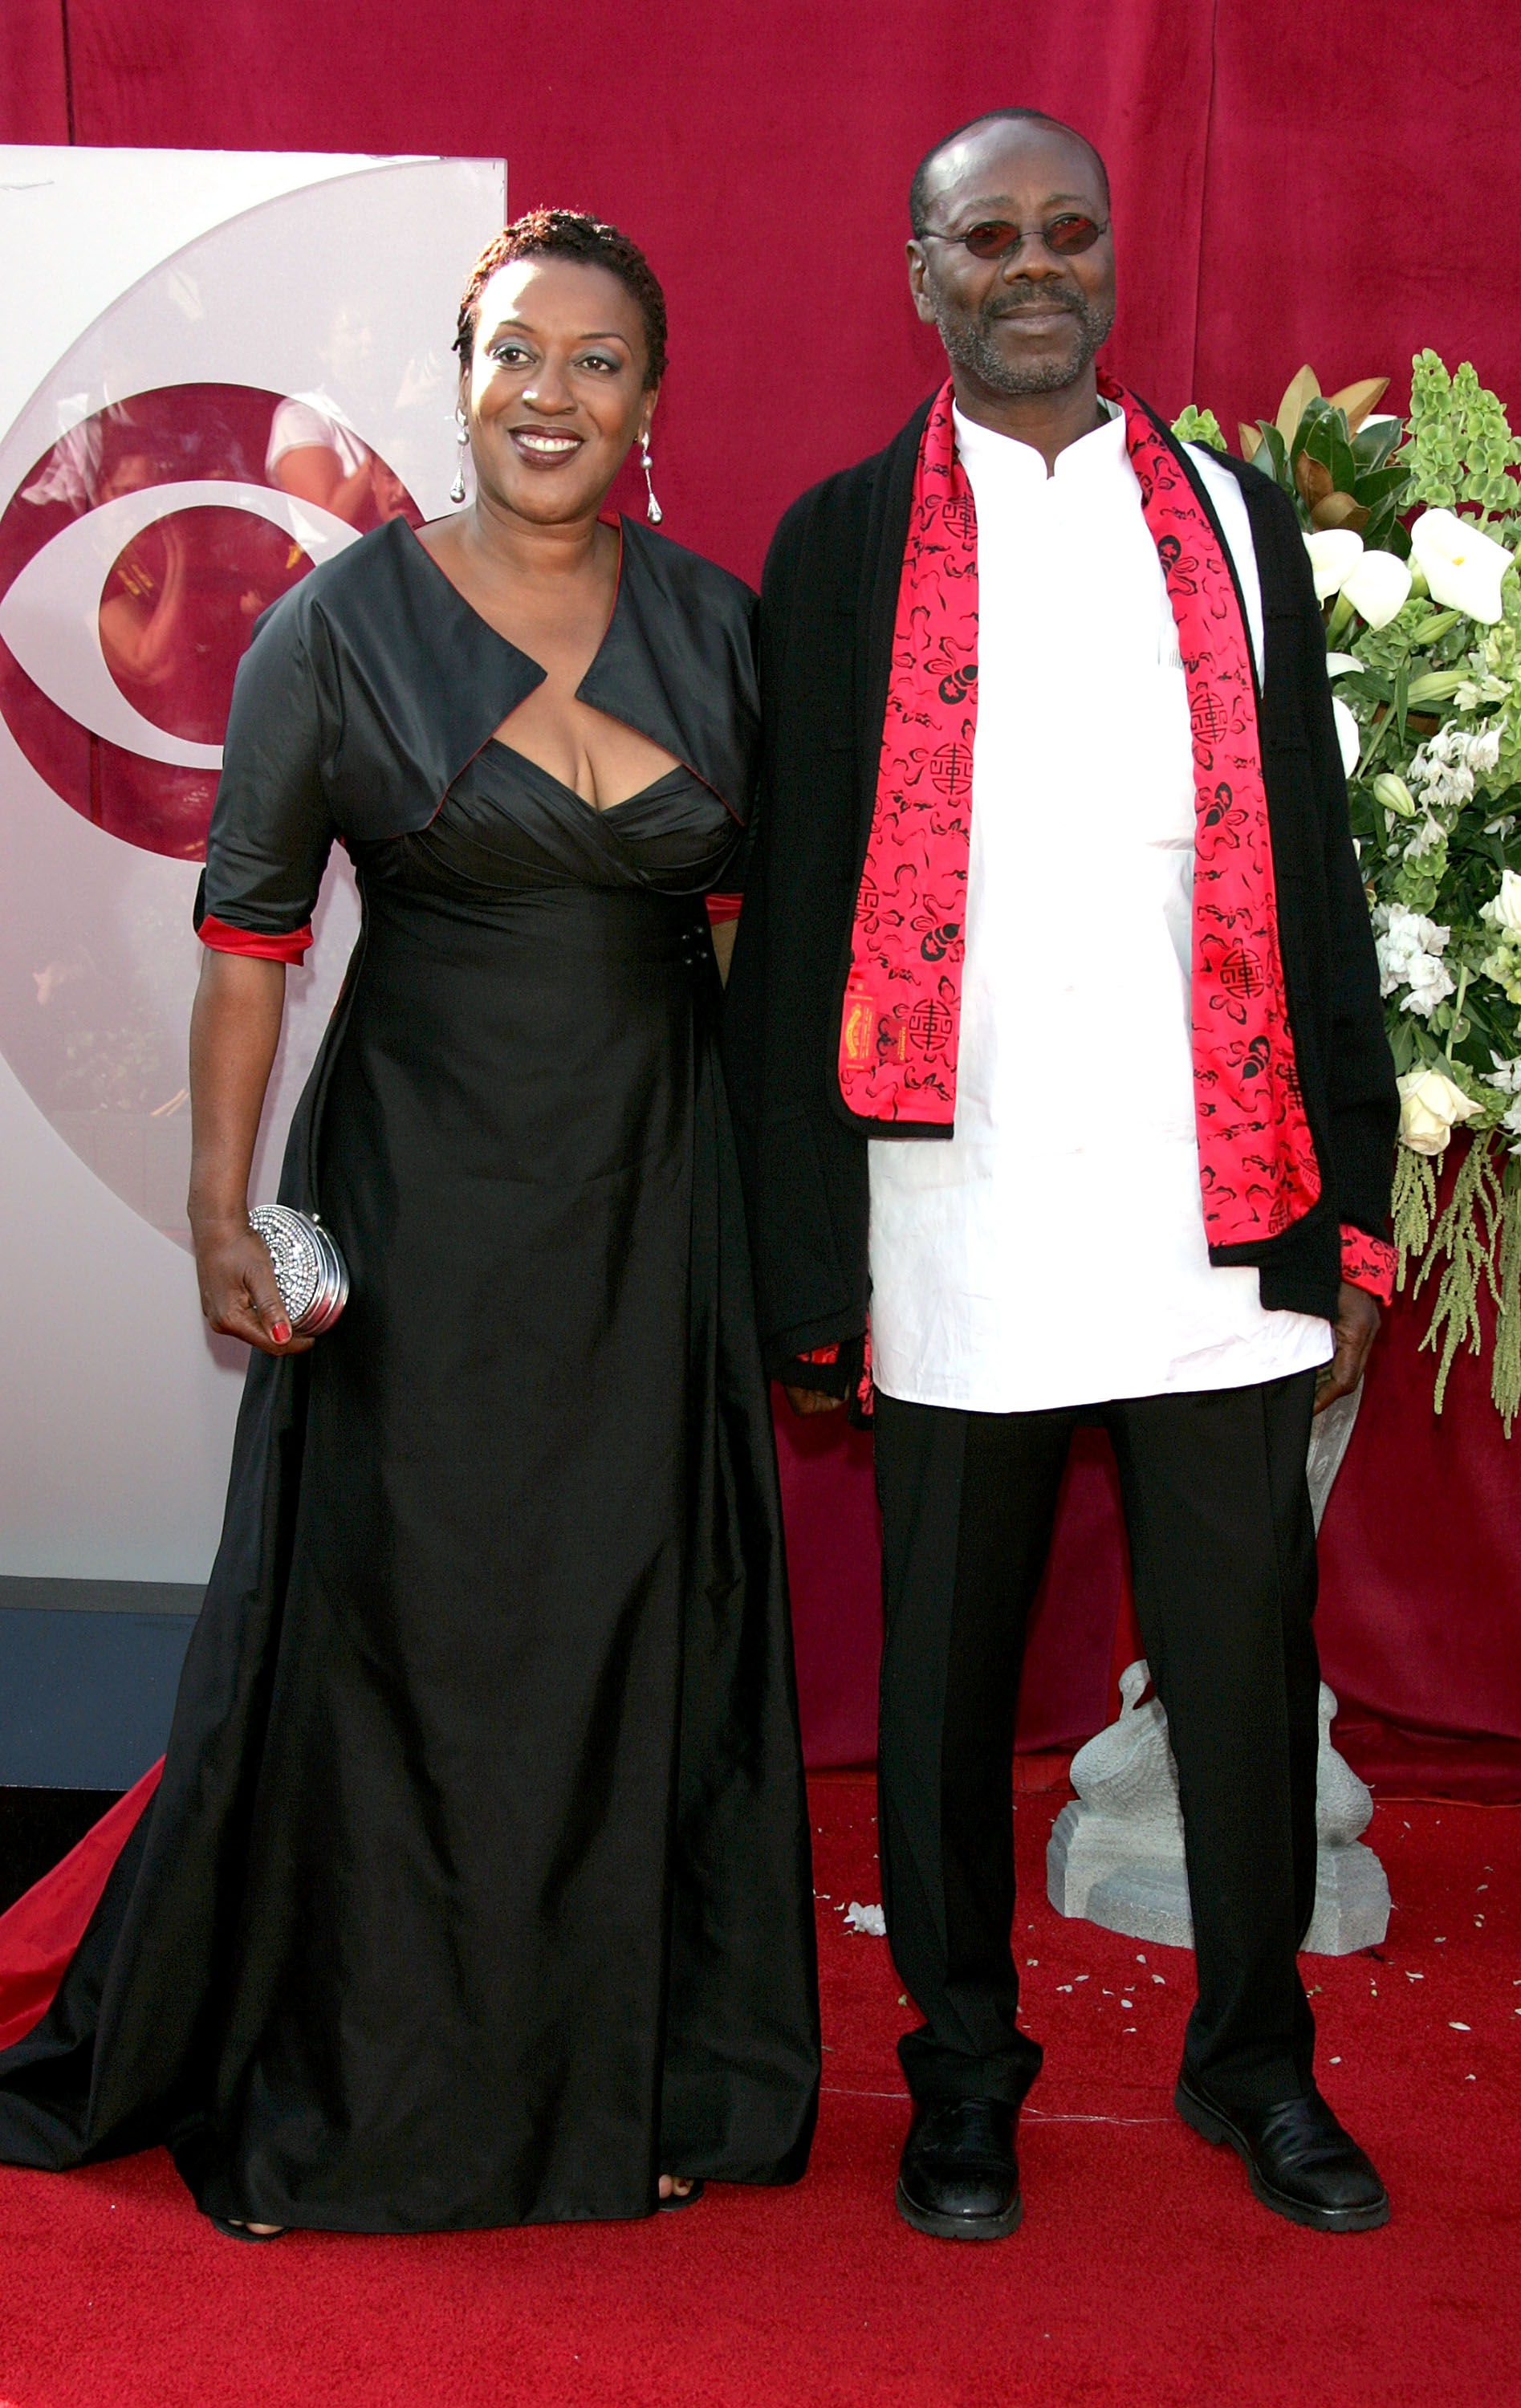 CCH Pounder and her husband Boubacar Kone arrive at the 57th Annual Emmy Awards held at the Shrine Auditorium on September 18, 2005, in Los Angeles, California. | Source: Getty Images